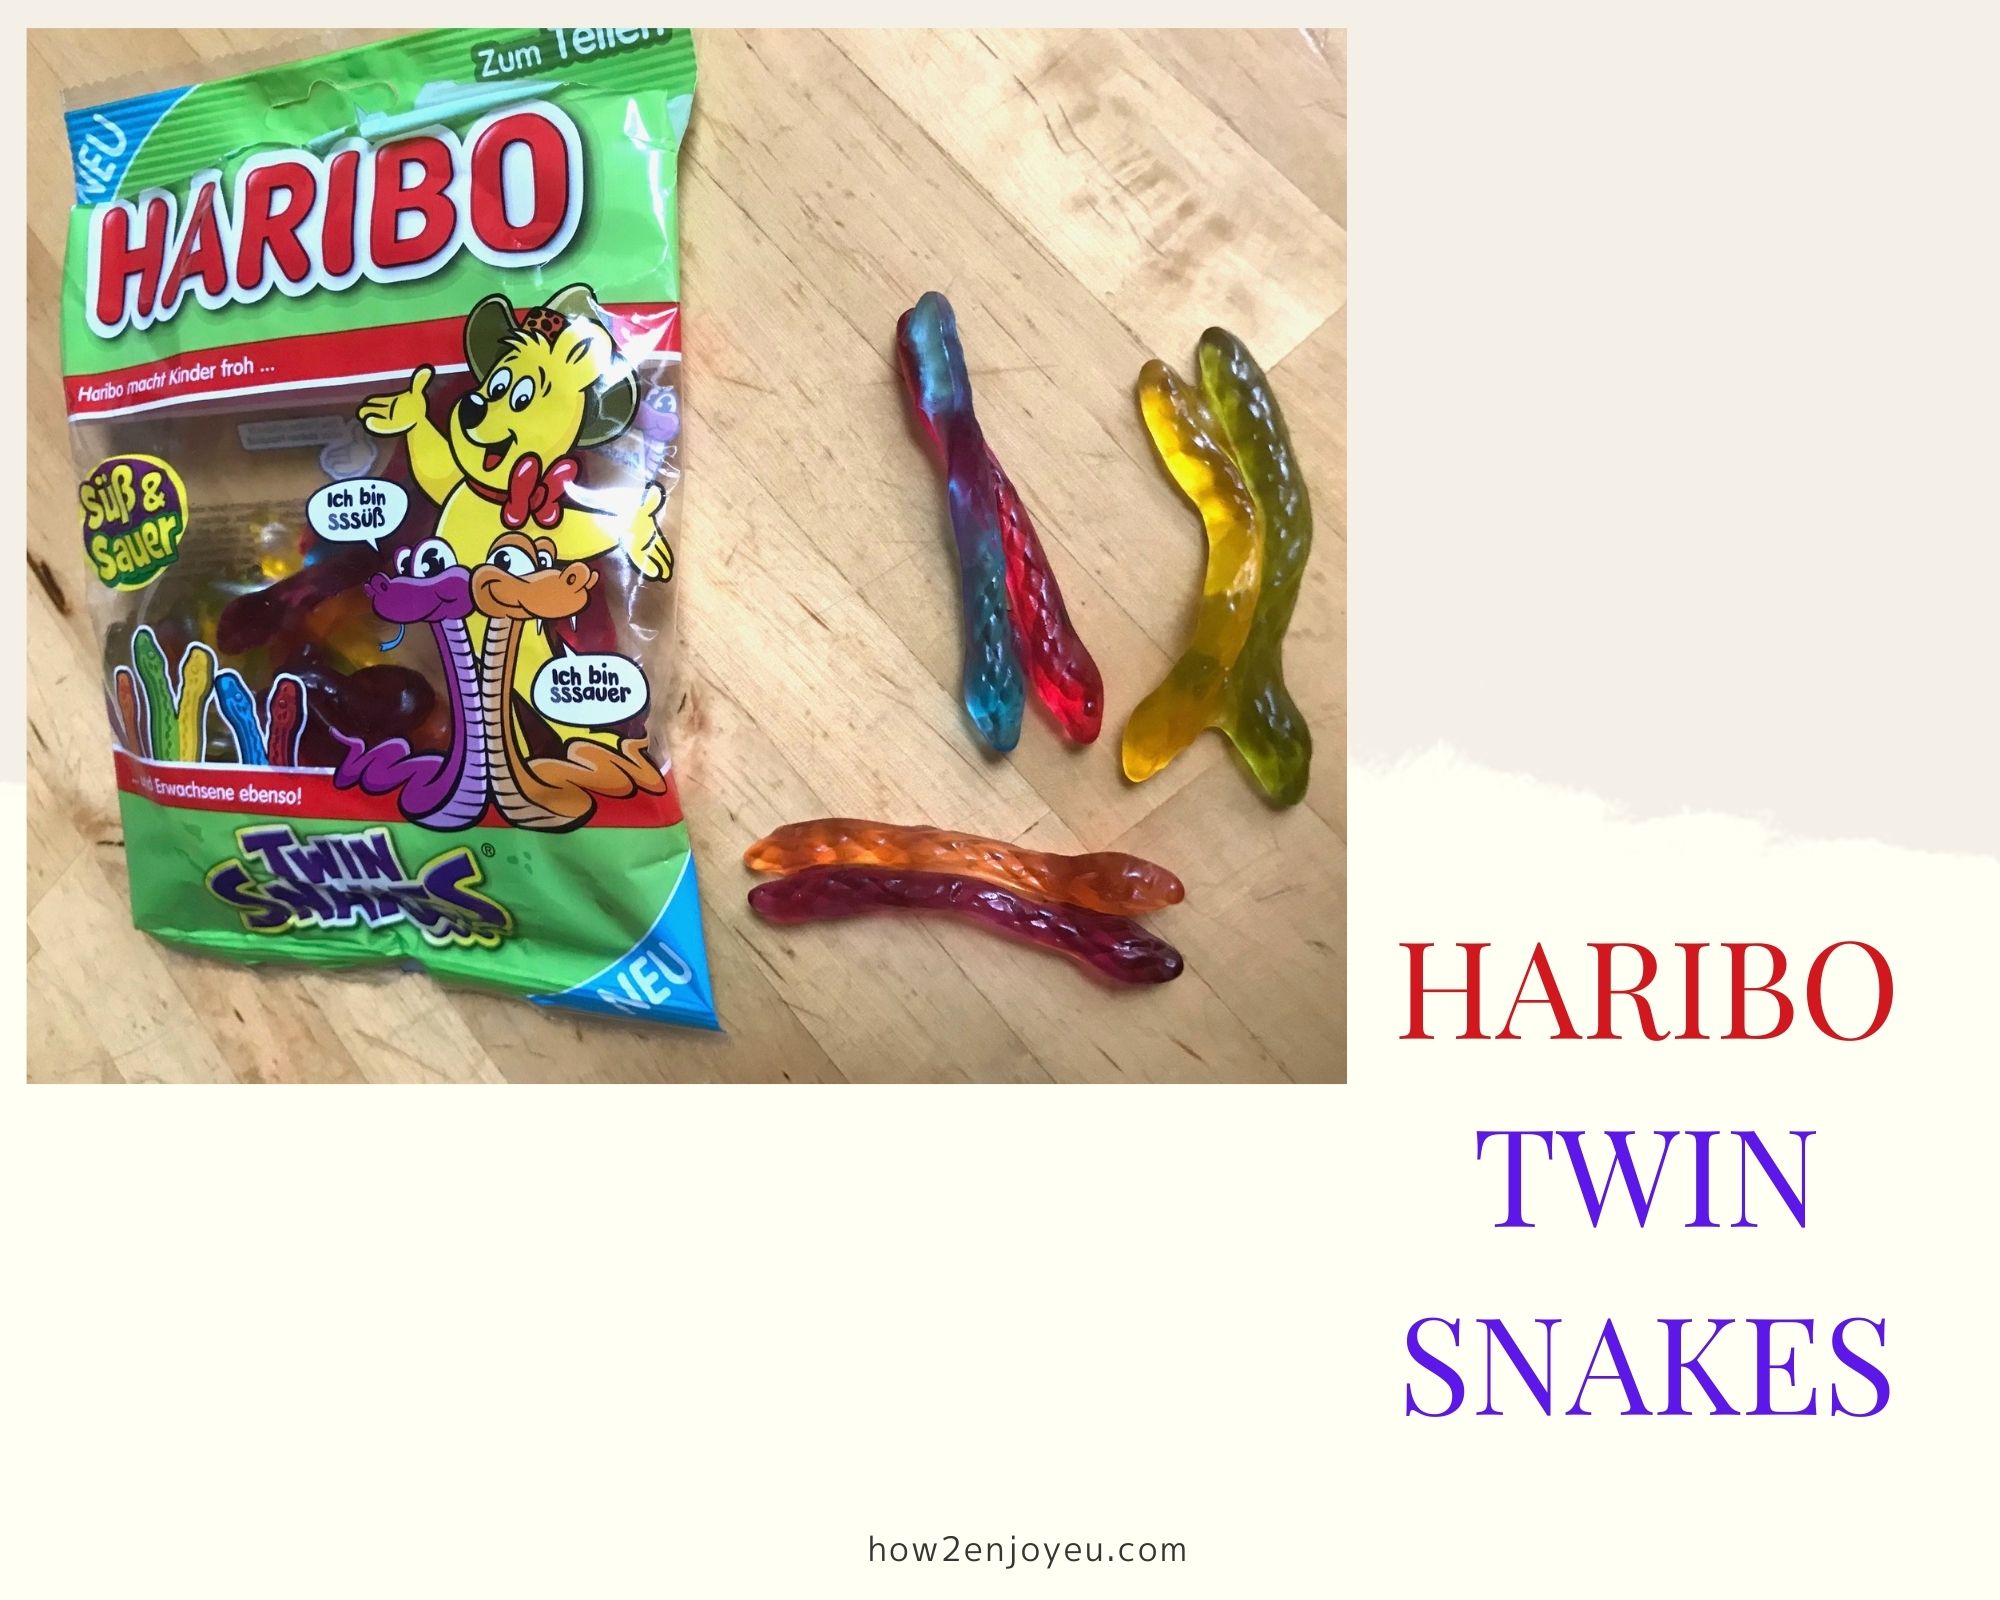 Read more about the article HARIBOの新商品、2匹のヘビのグミ【Twin Snakes】